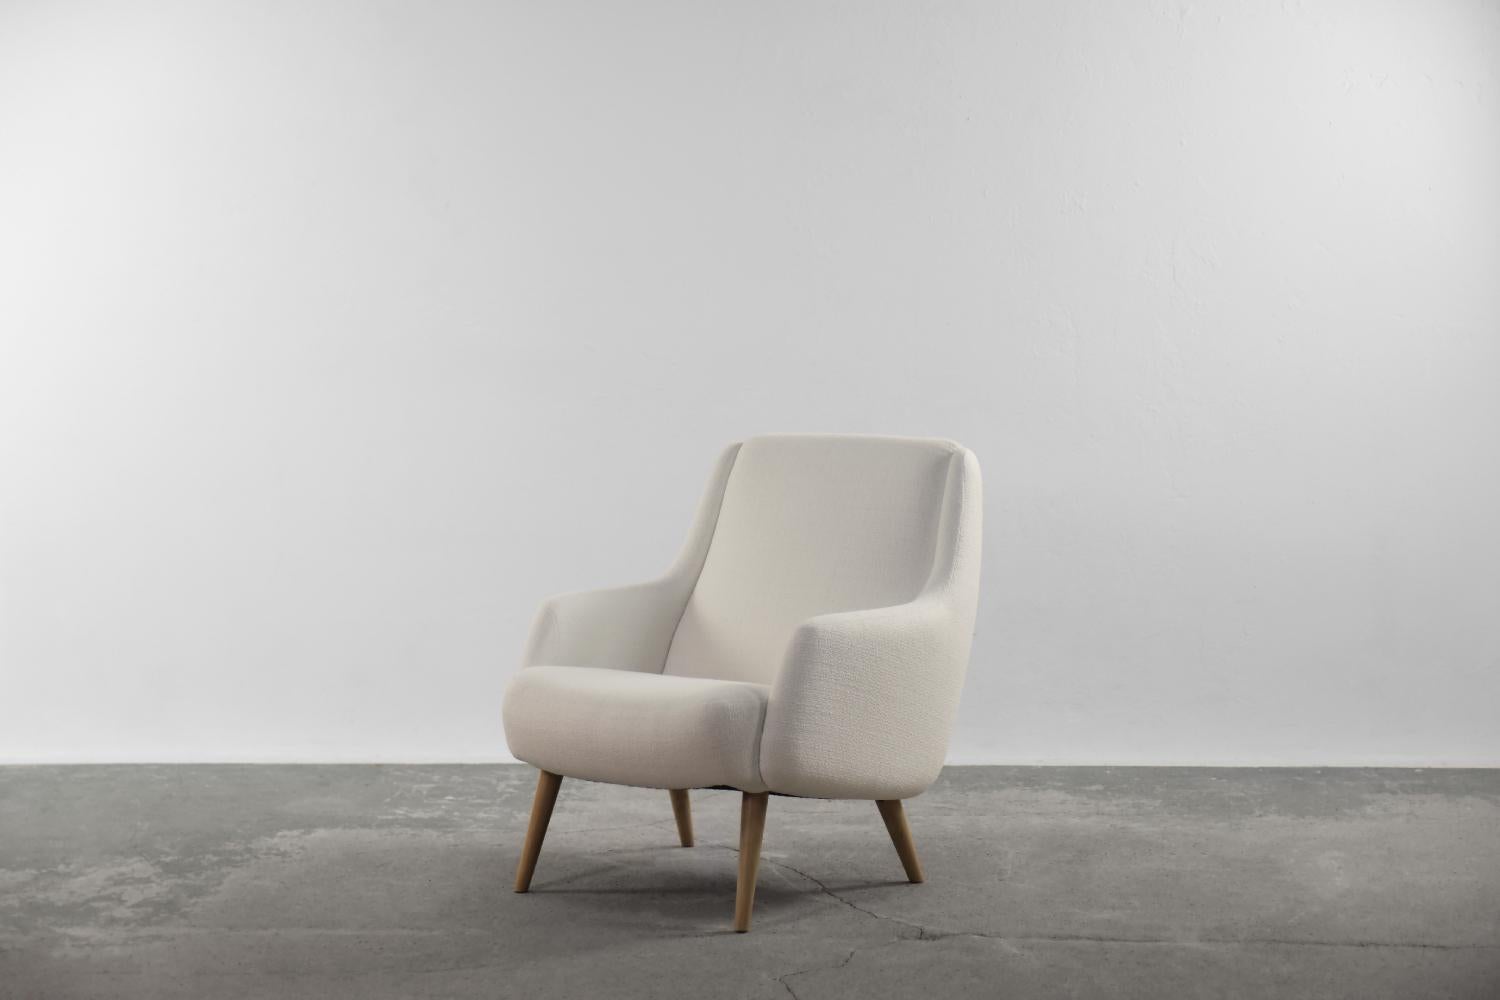 This Capri armchair from the Bohag Bra series was designed by Alf Svensson for the Swedish Dux, Ljungs Industrier manufacturer during the 1950s. The armchair was upholstered with a white Davis fabric obtained from recycled PET bottles. One running